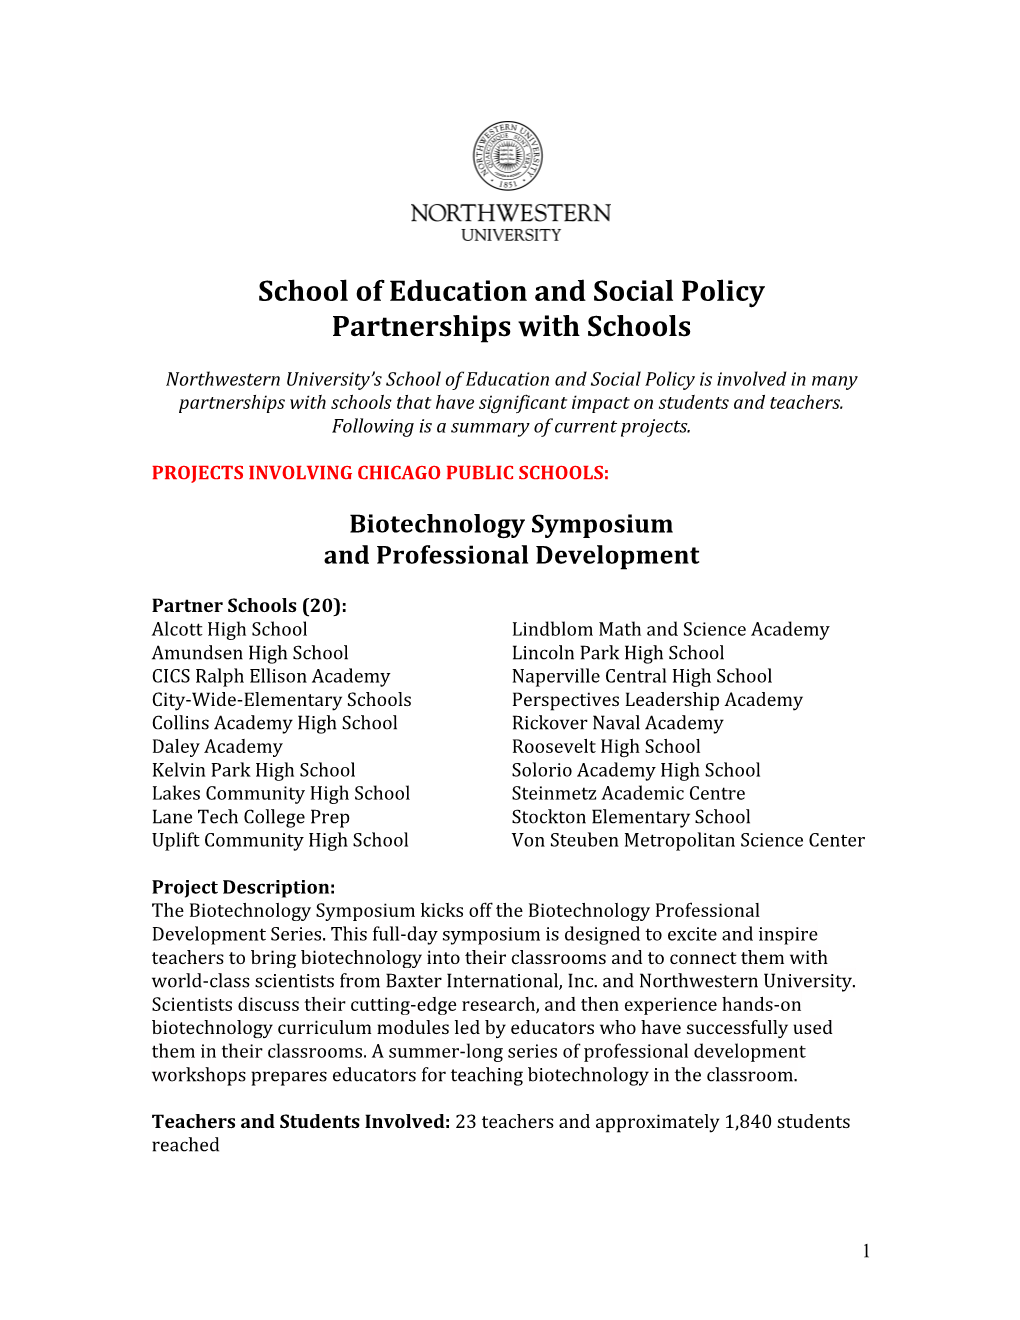 School of Education and Social Policy Partnerships with Schools